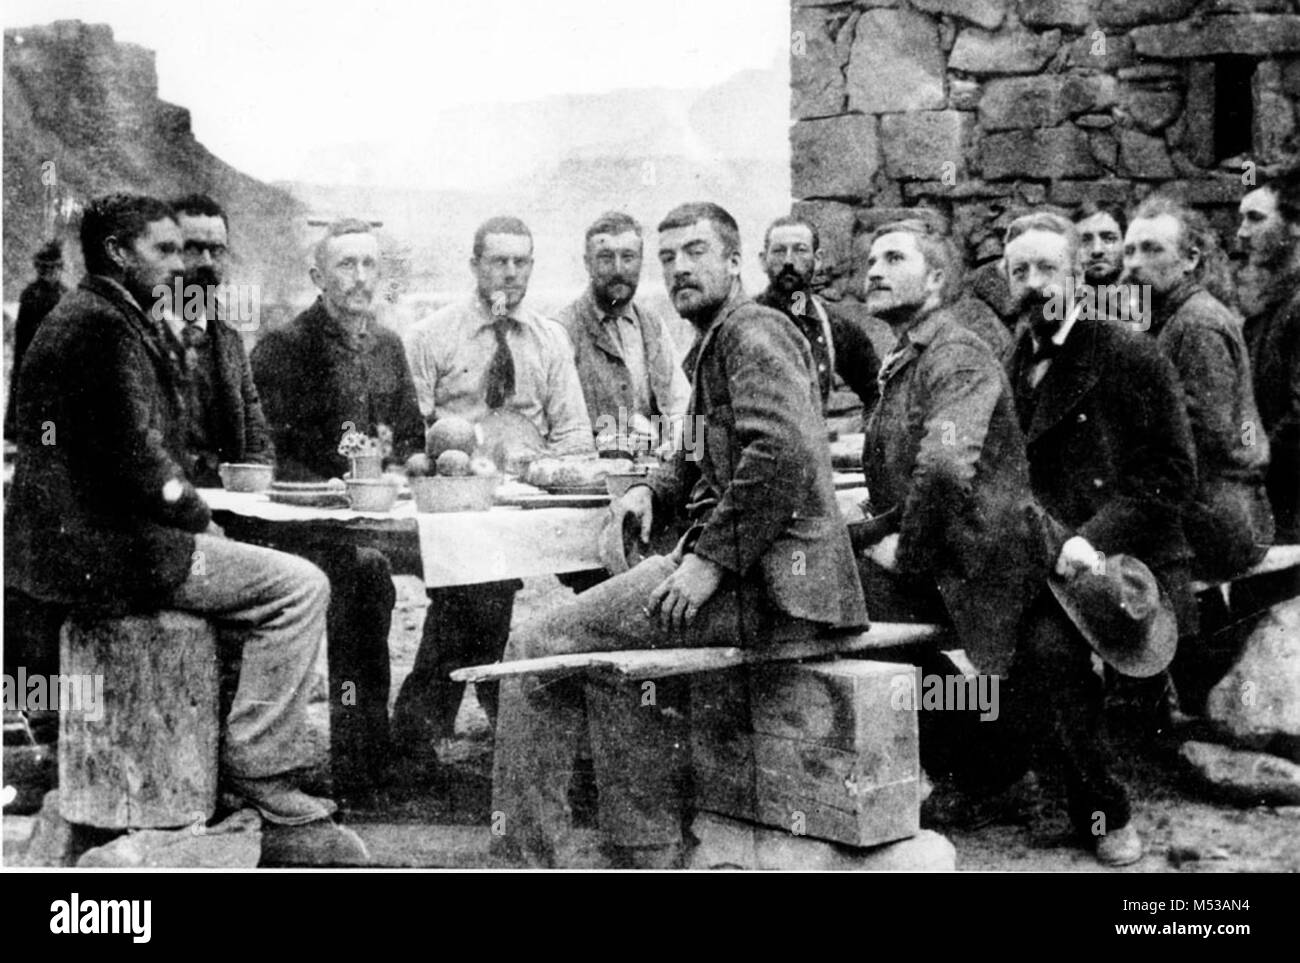 THE STANTON EXPEDITION CREW- CHRISTMAS DINNER AT LEES FERRY. L TO  R: STANTON, NIMS, EDWARDS, TRAVERS, BALLARD, GIBSON, KANE, BROWN, TWINING, HOUGE, MCDONALD, HISLOP. 1889.     Grand Canyon Nat Park Historic River Photo. Stock Photo